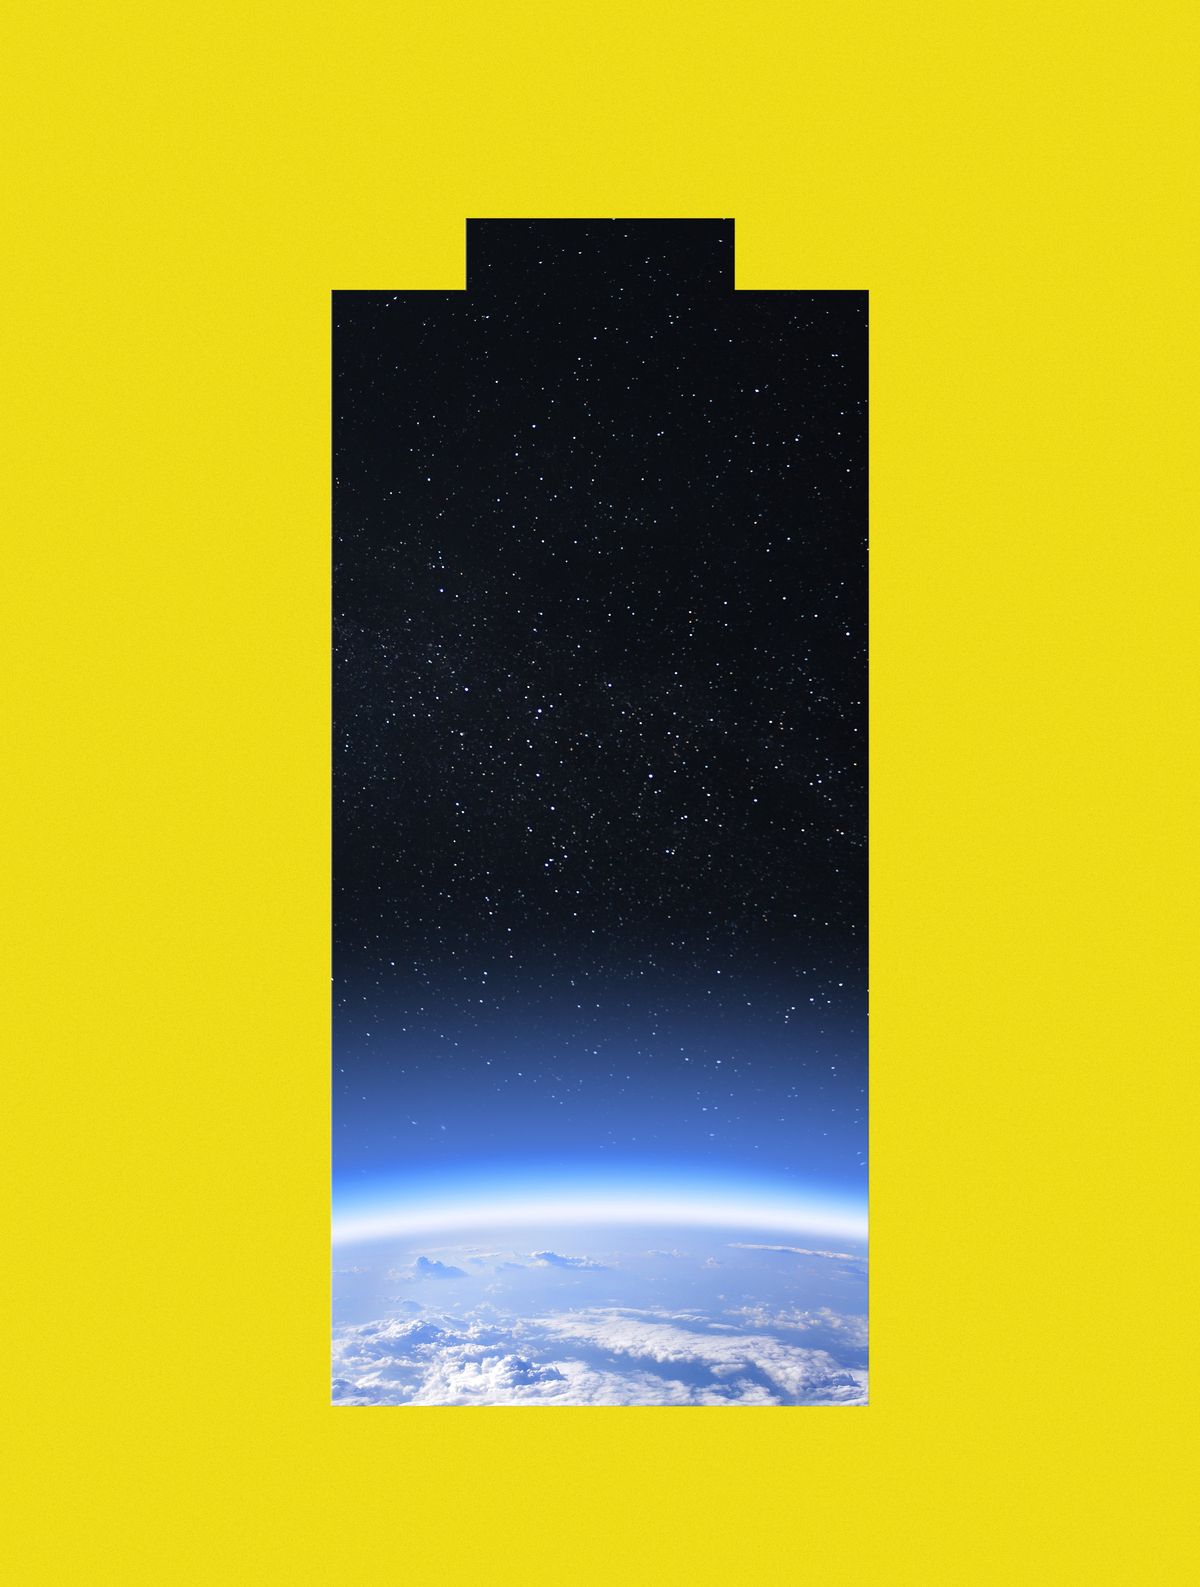 A view of the earth of through an icon of a battery